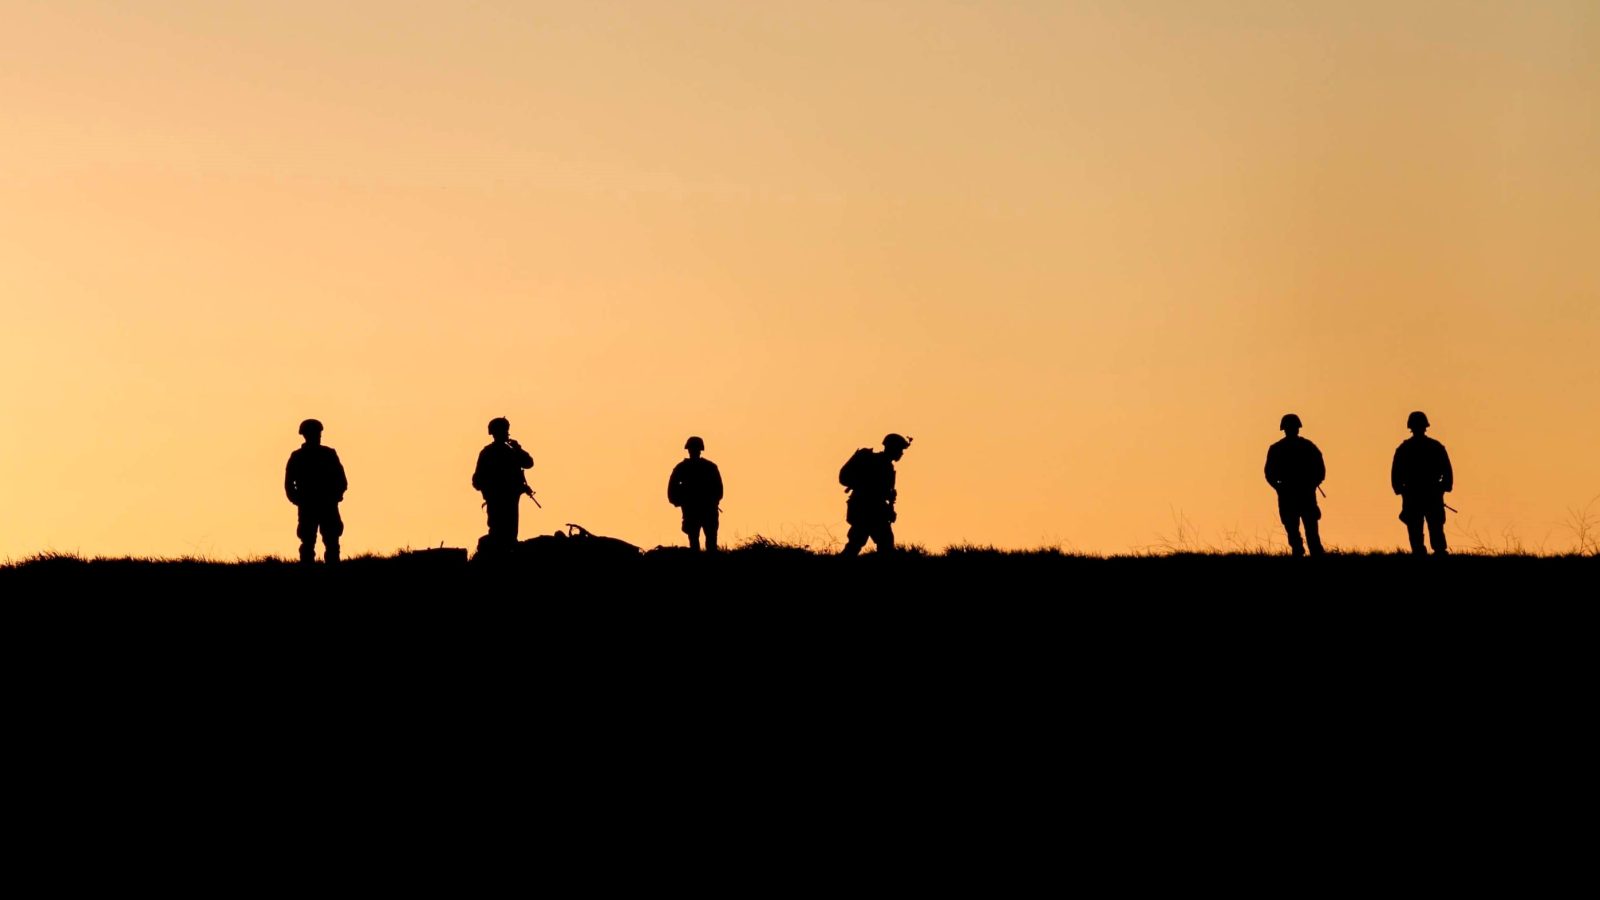 A group of uniformed soldiers stand silhouetted against a sunset